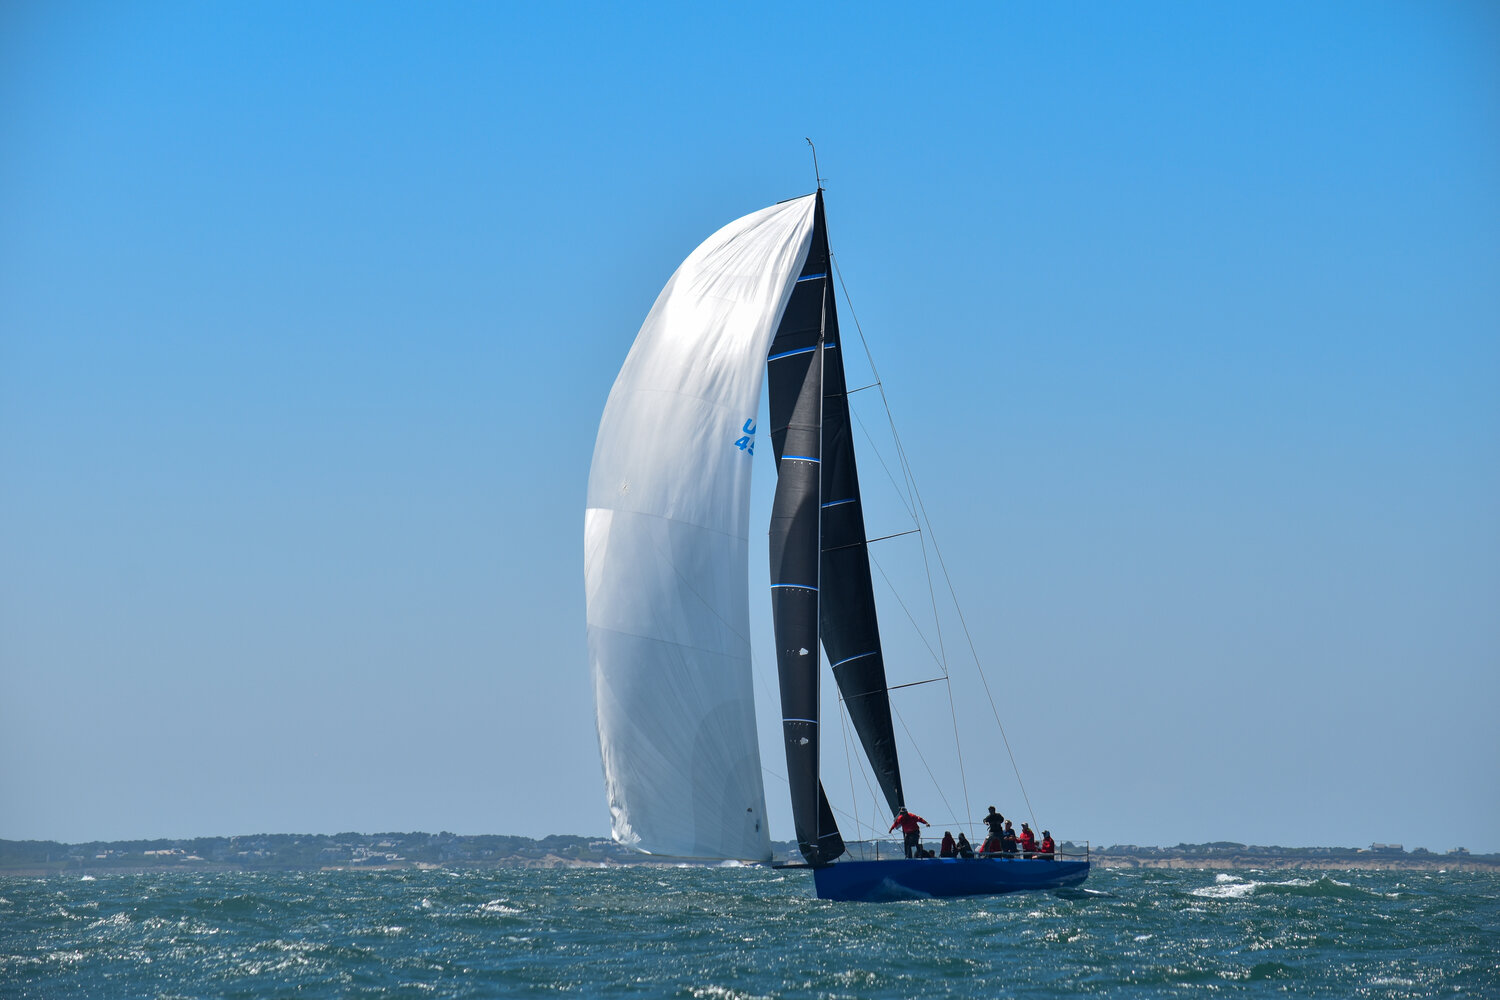 The Nantucket Regatta was held Saturday after day one of racing was postponed due to weather Friday.